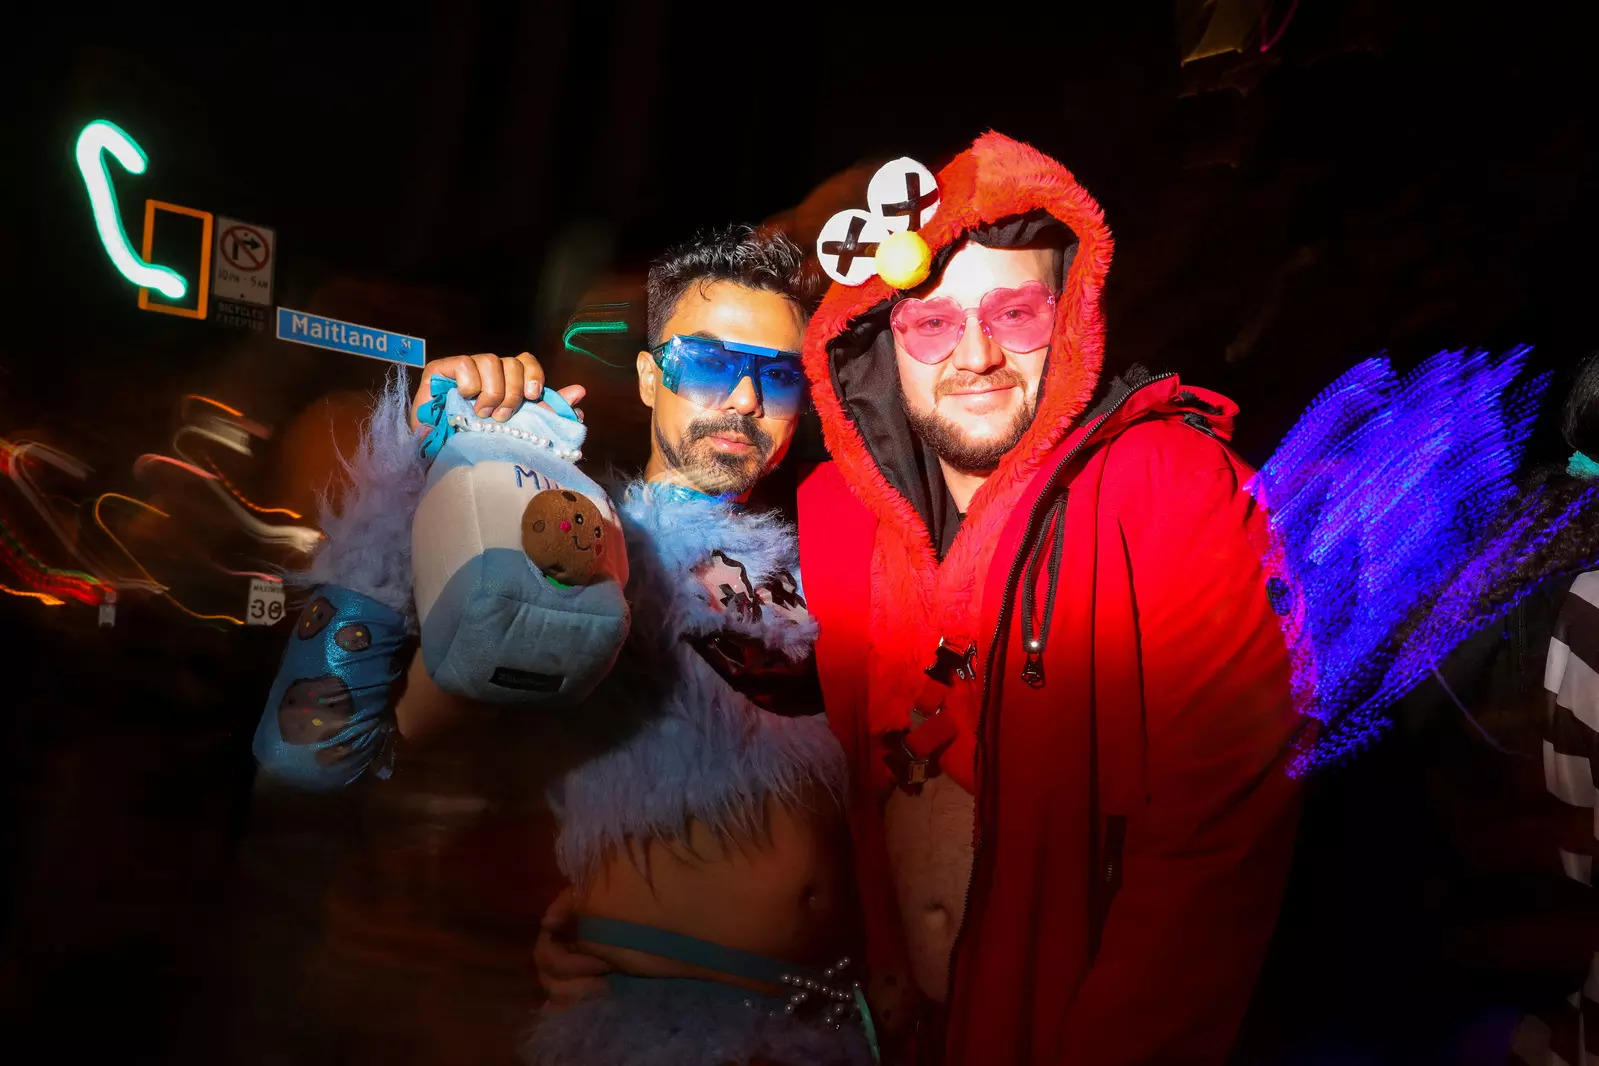 Revelers around the world dress up for Halloween; see pics